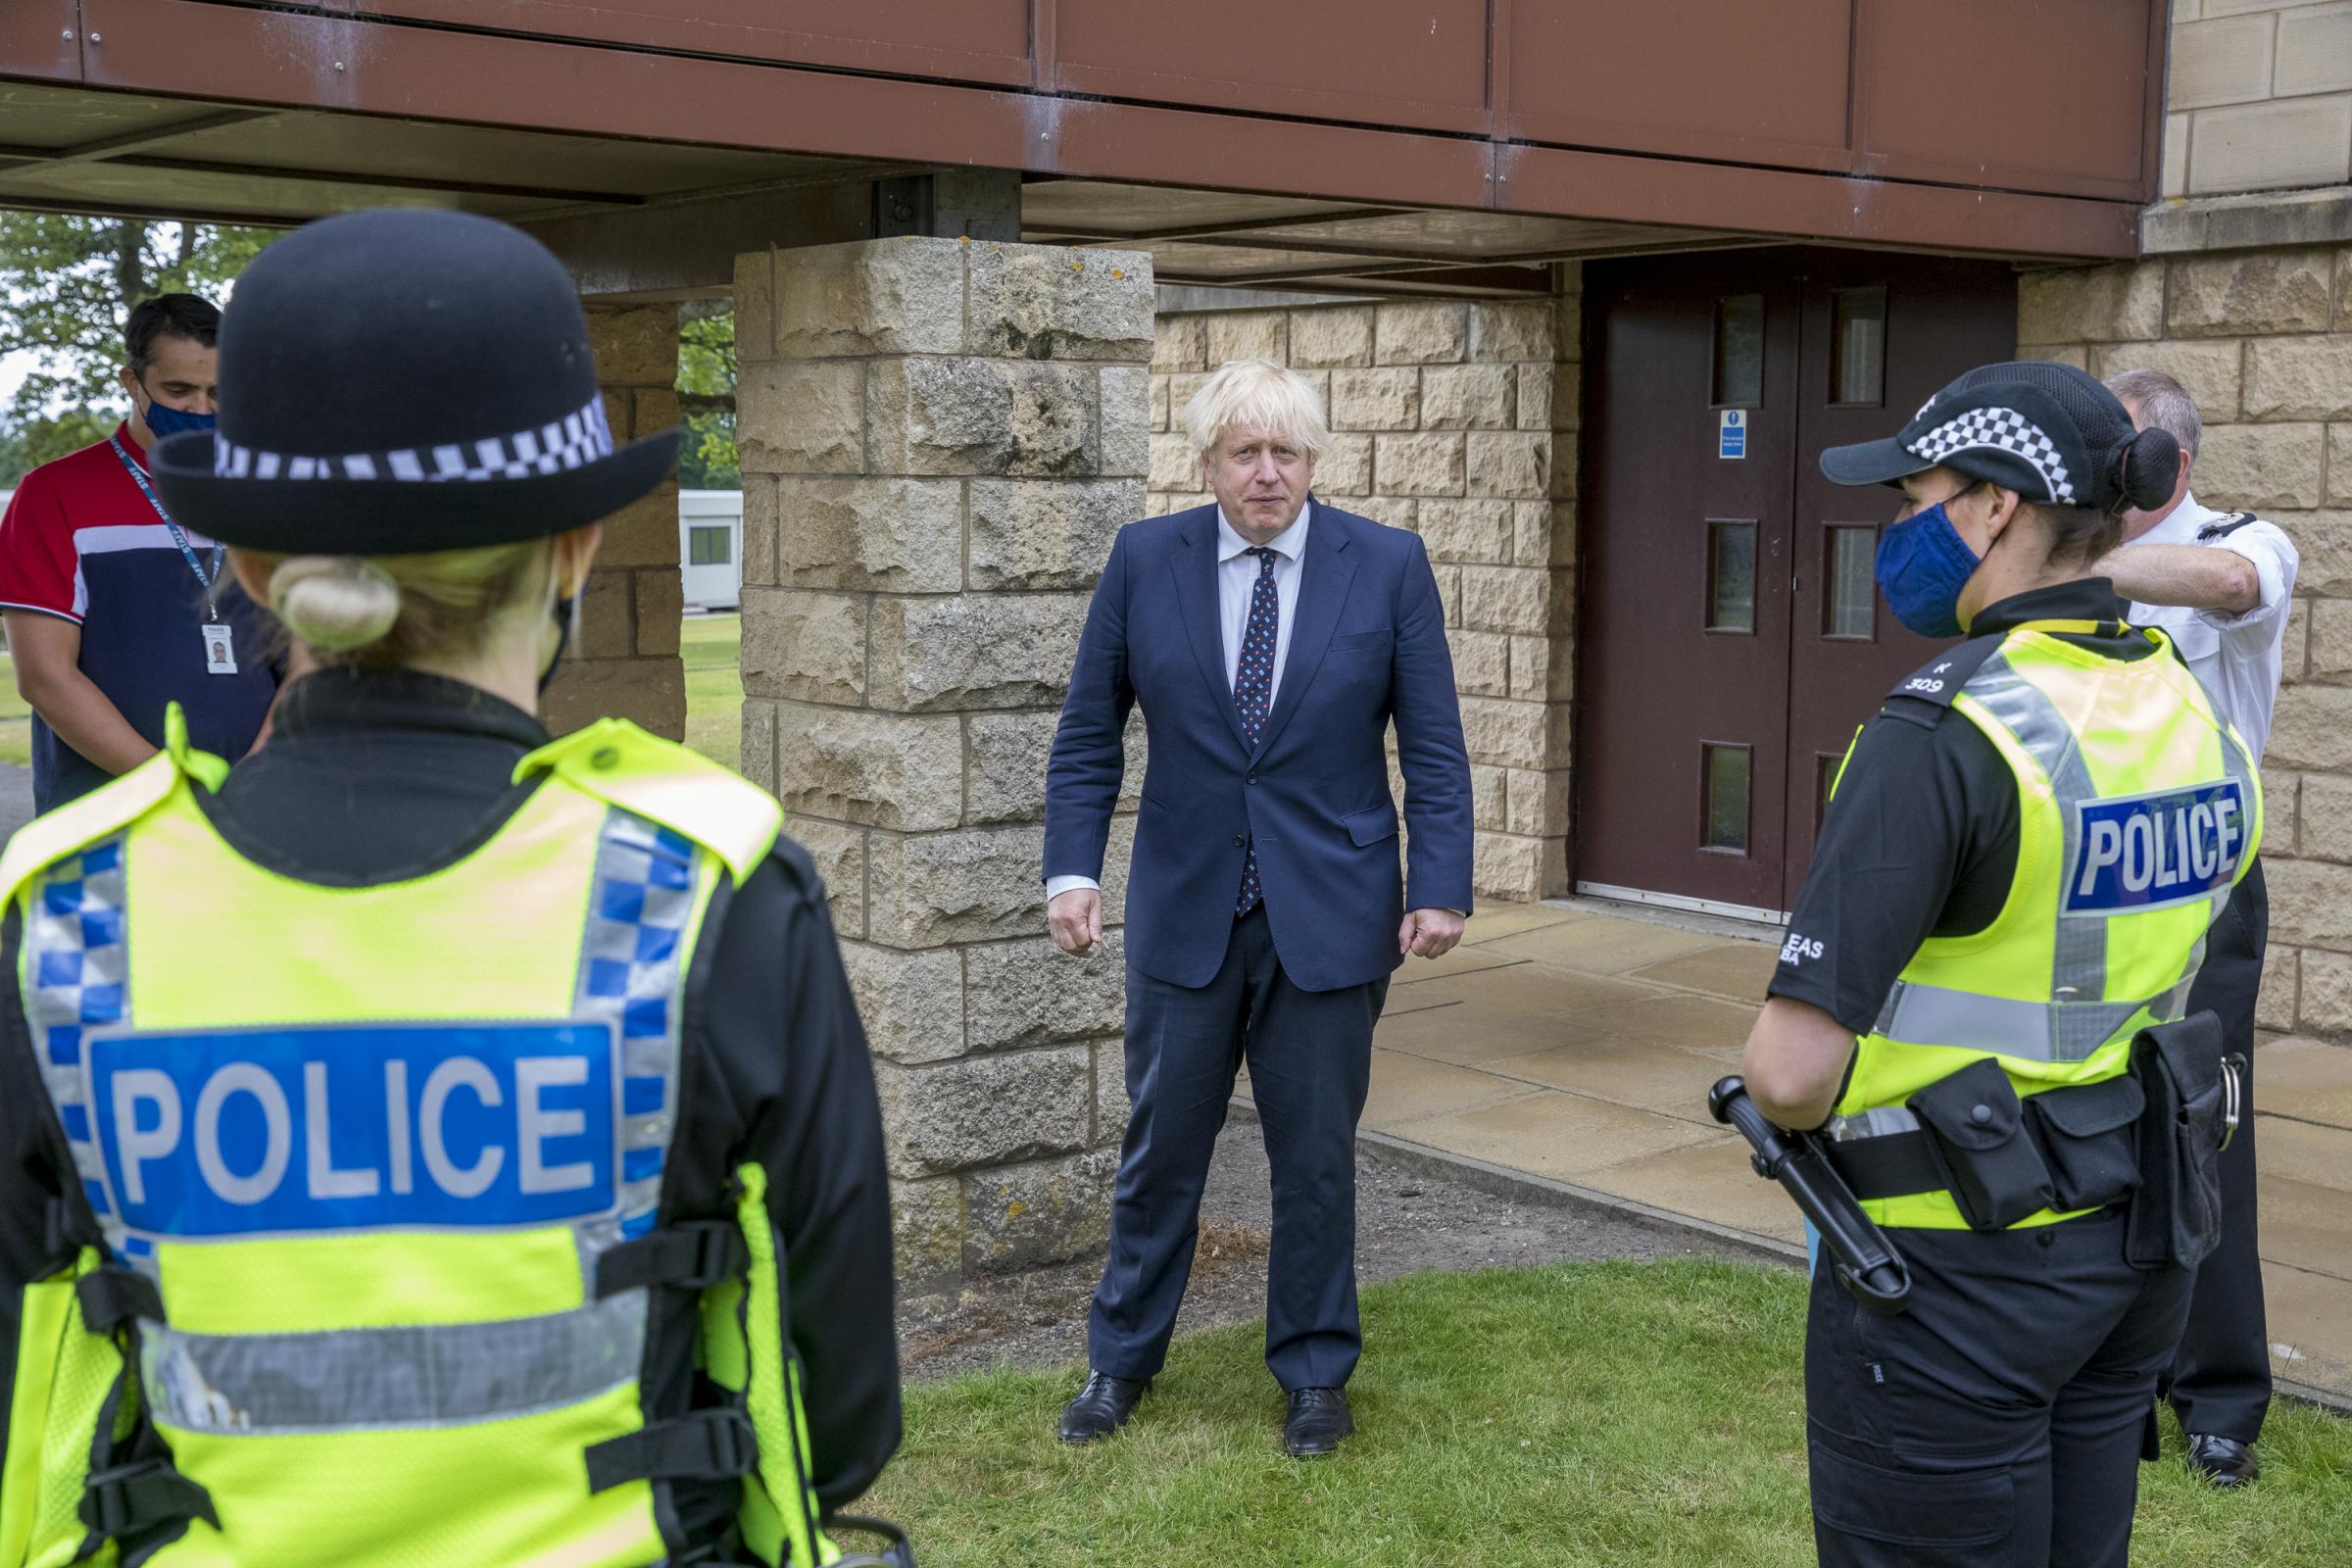 Boris Johnson promises funding for 10,000 police officers at Glasgow's COP26